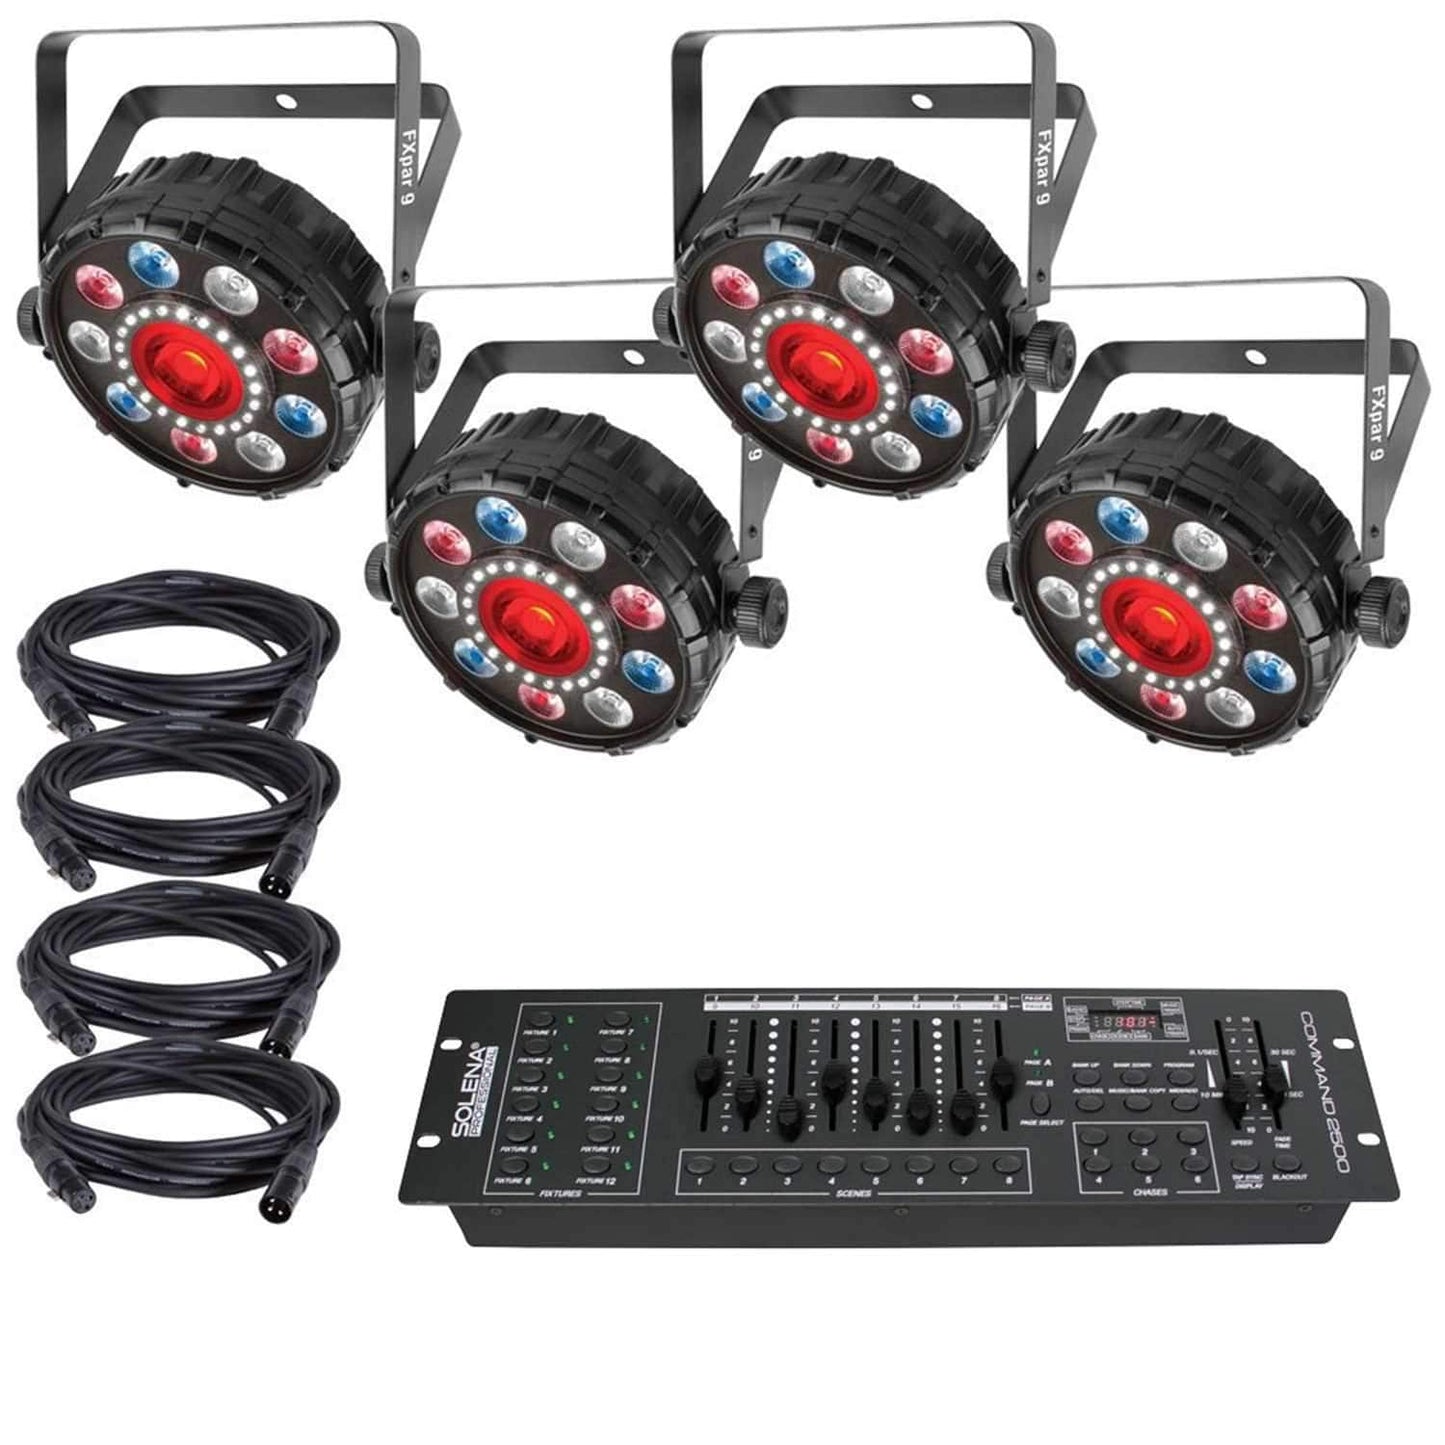 Chauvet FXPAR 9 Multi-Effect Light 4-Pack with DMX Controller - PSSL ProSound and Stage Lighting